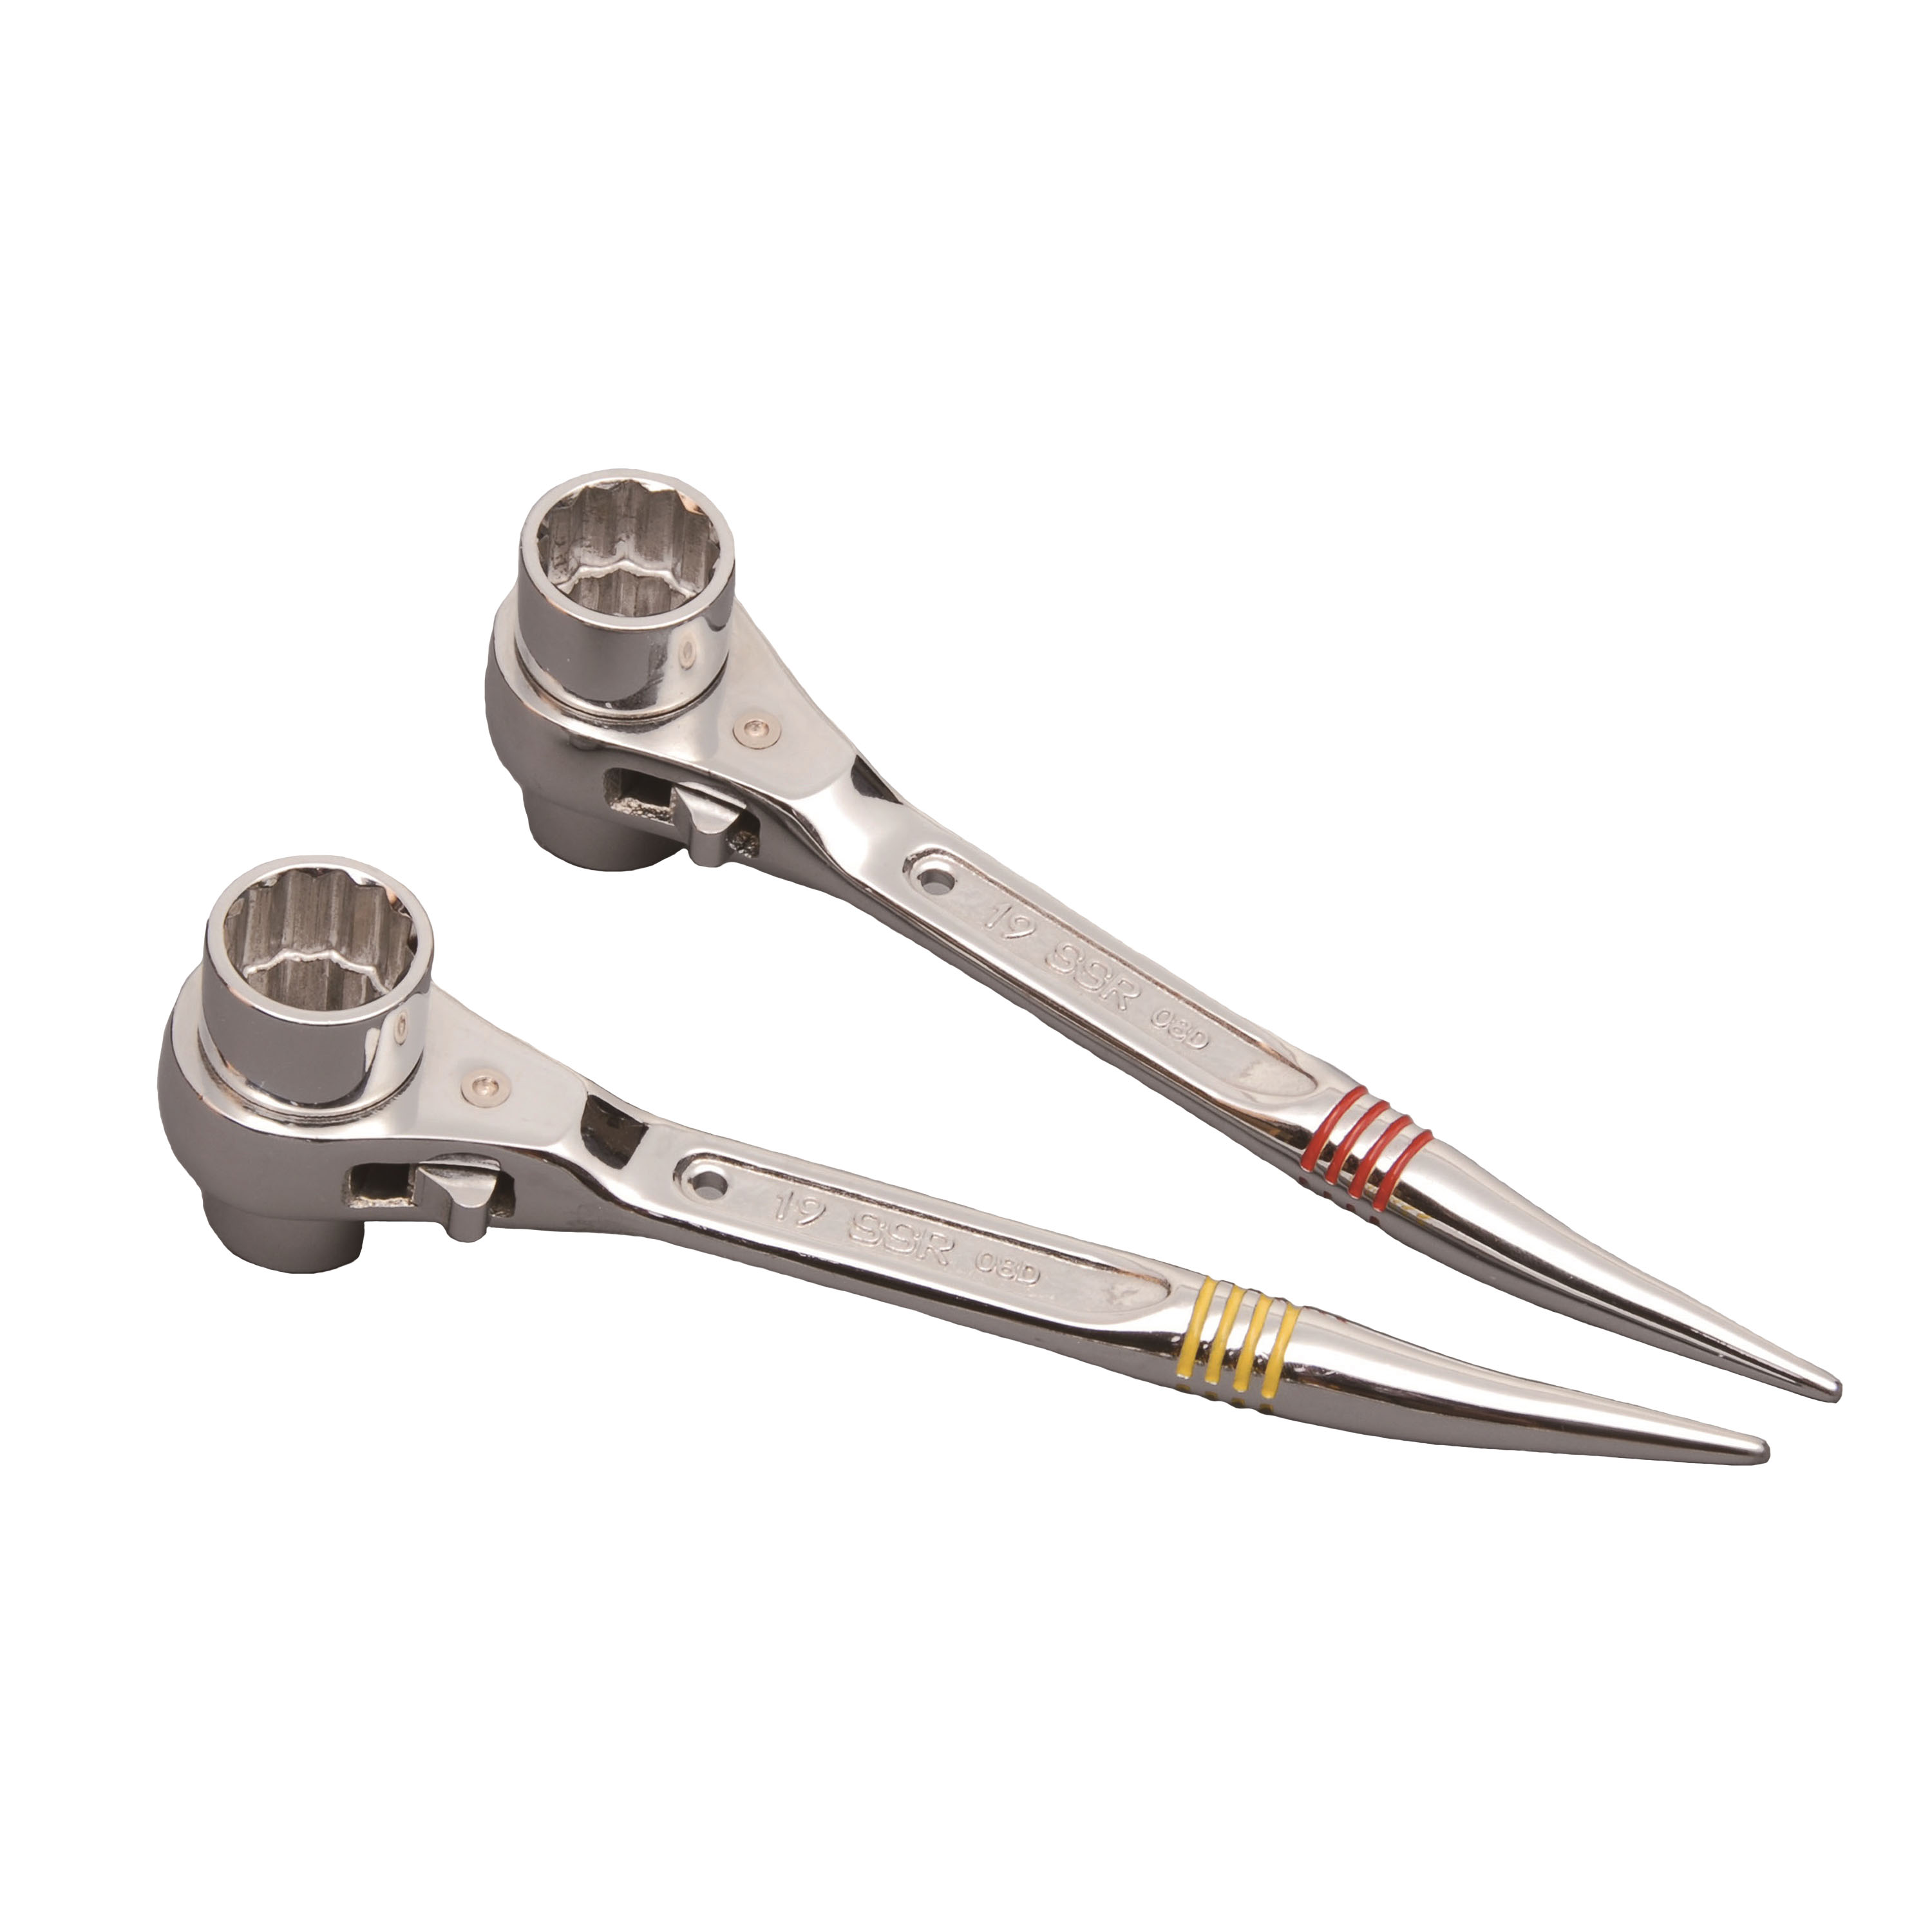 With Full-Polished Curved-Bolt-Hole Aligner, Double-Sided Ratchet Wrench, Mini Short Type